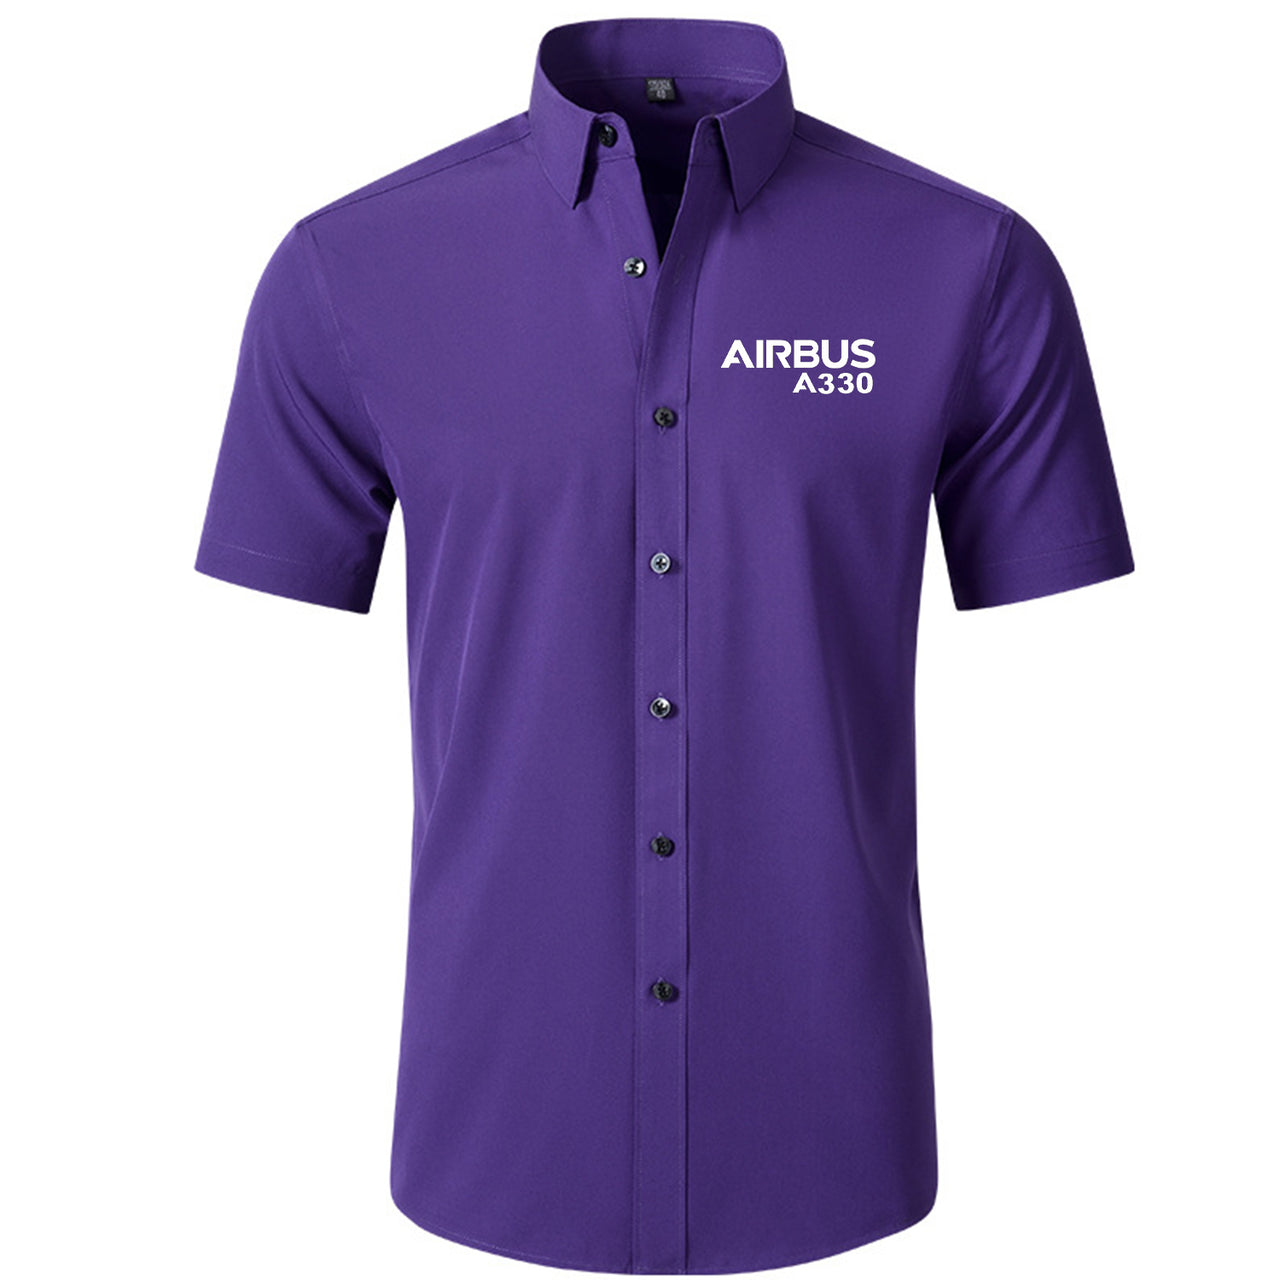 Airbus A330 & Text Designed Short Sleeve Shirts